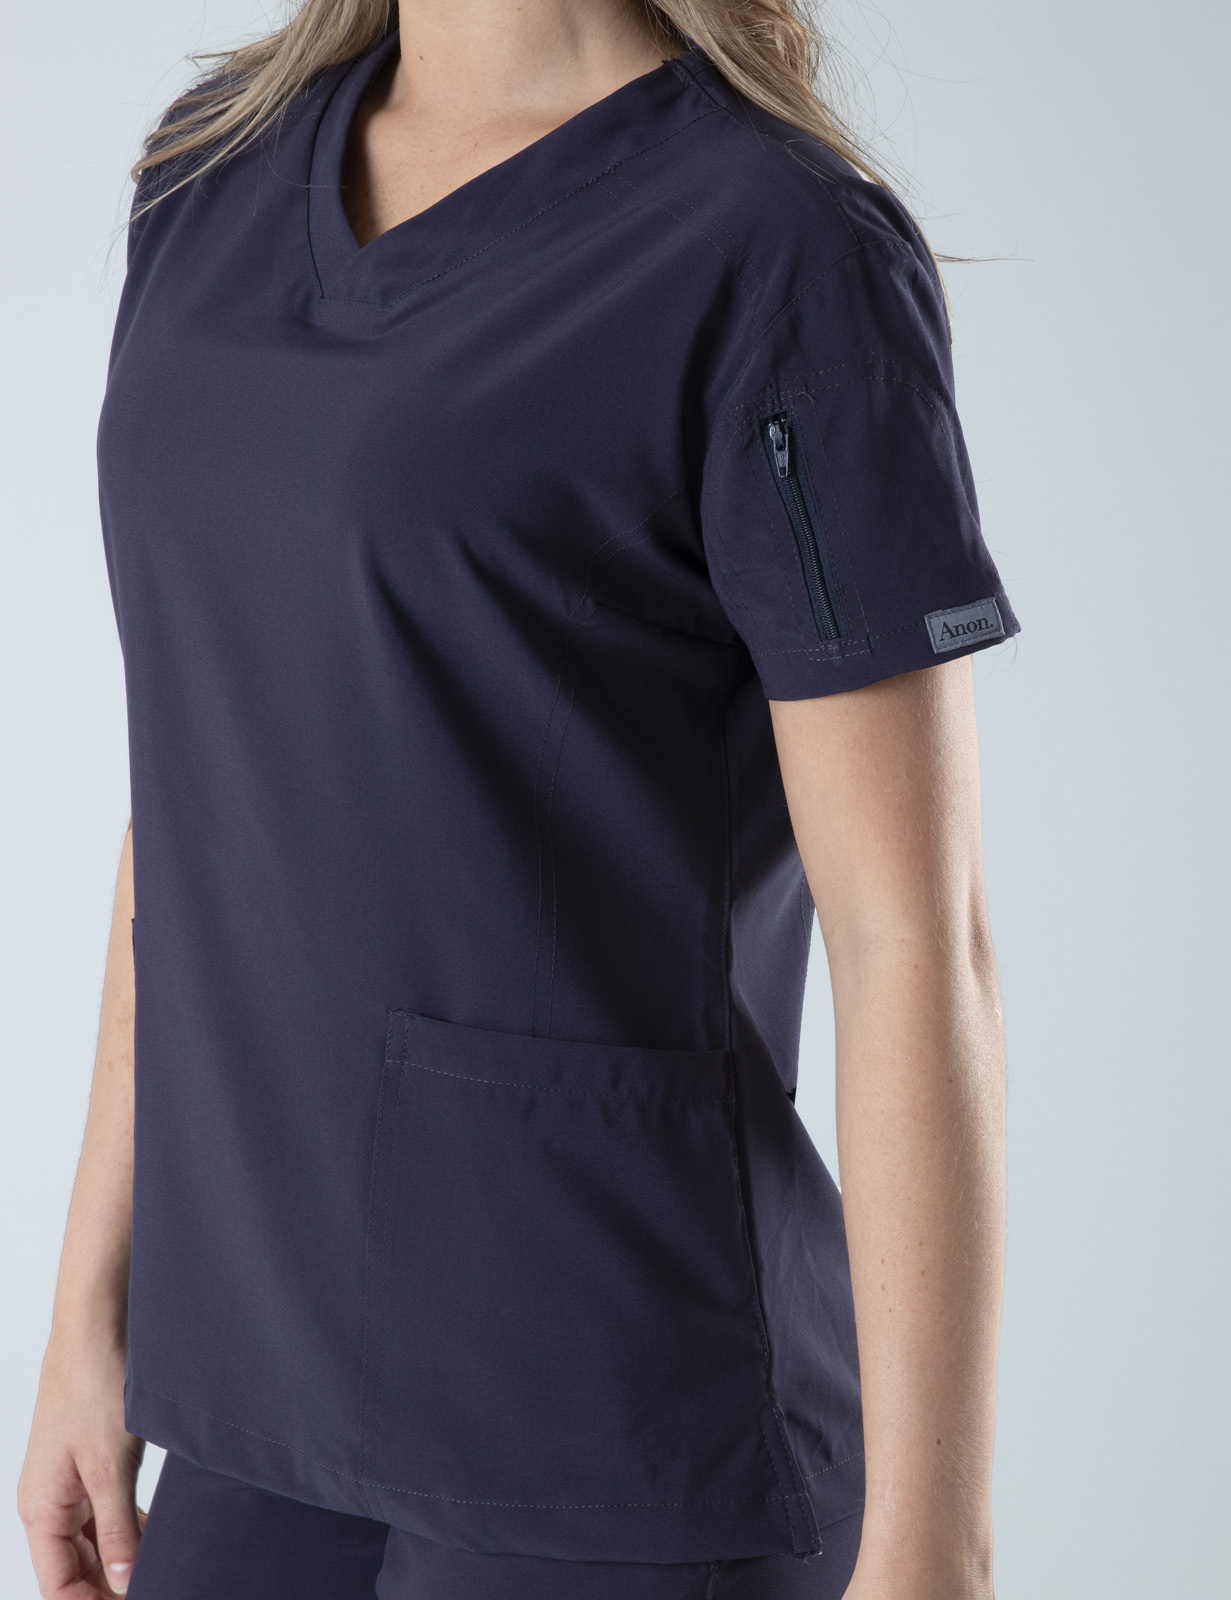 Anon Women's Scrub Top (Whisper Collection) Poly/Spandex - Charcoal Navy